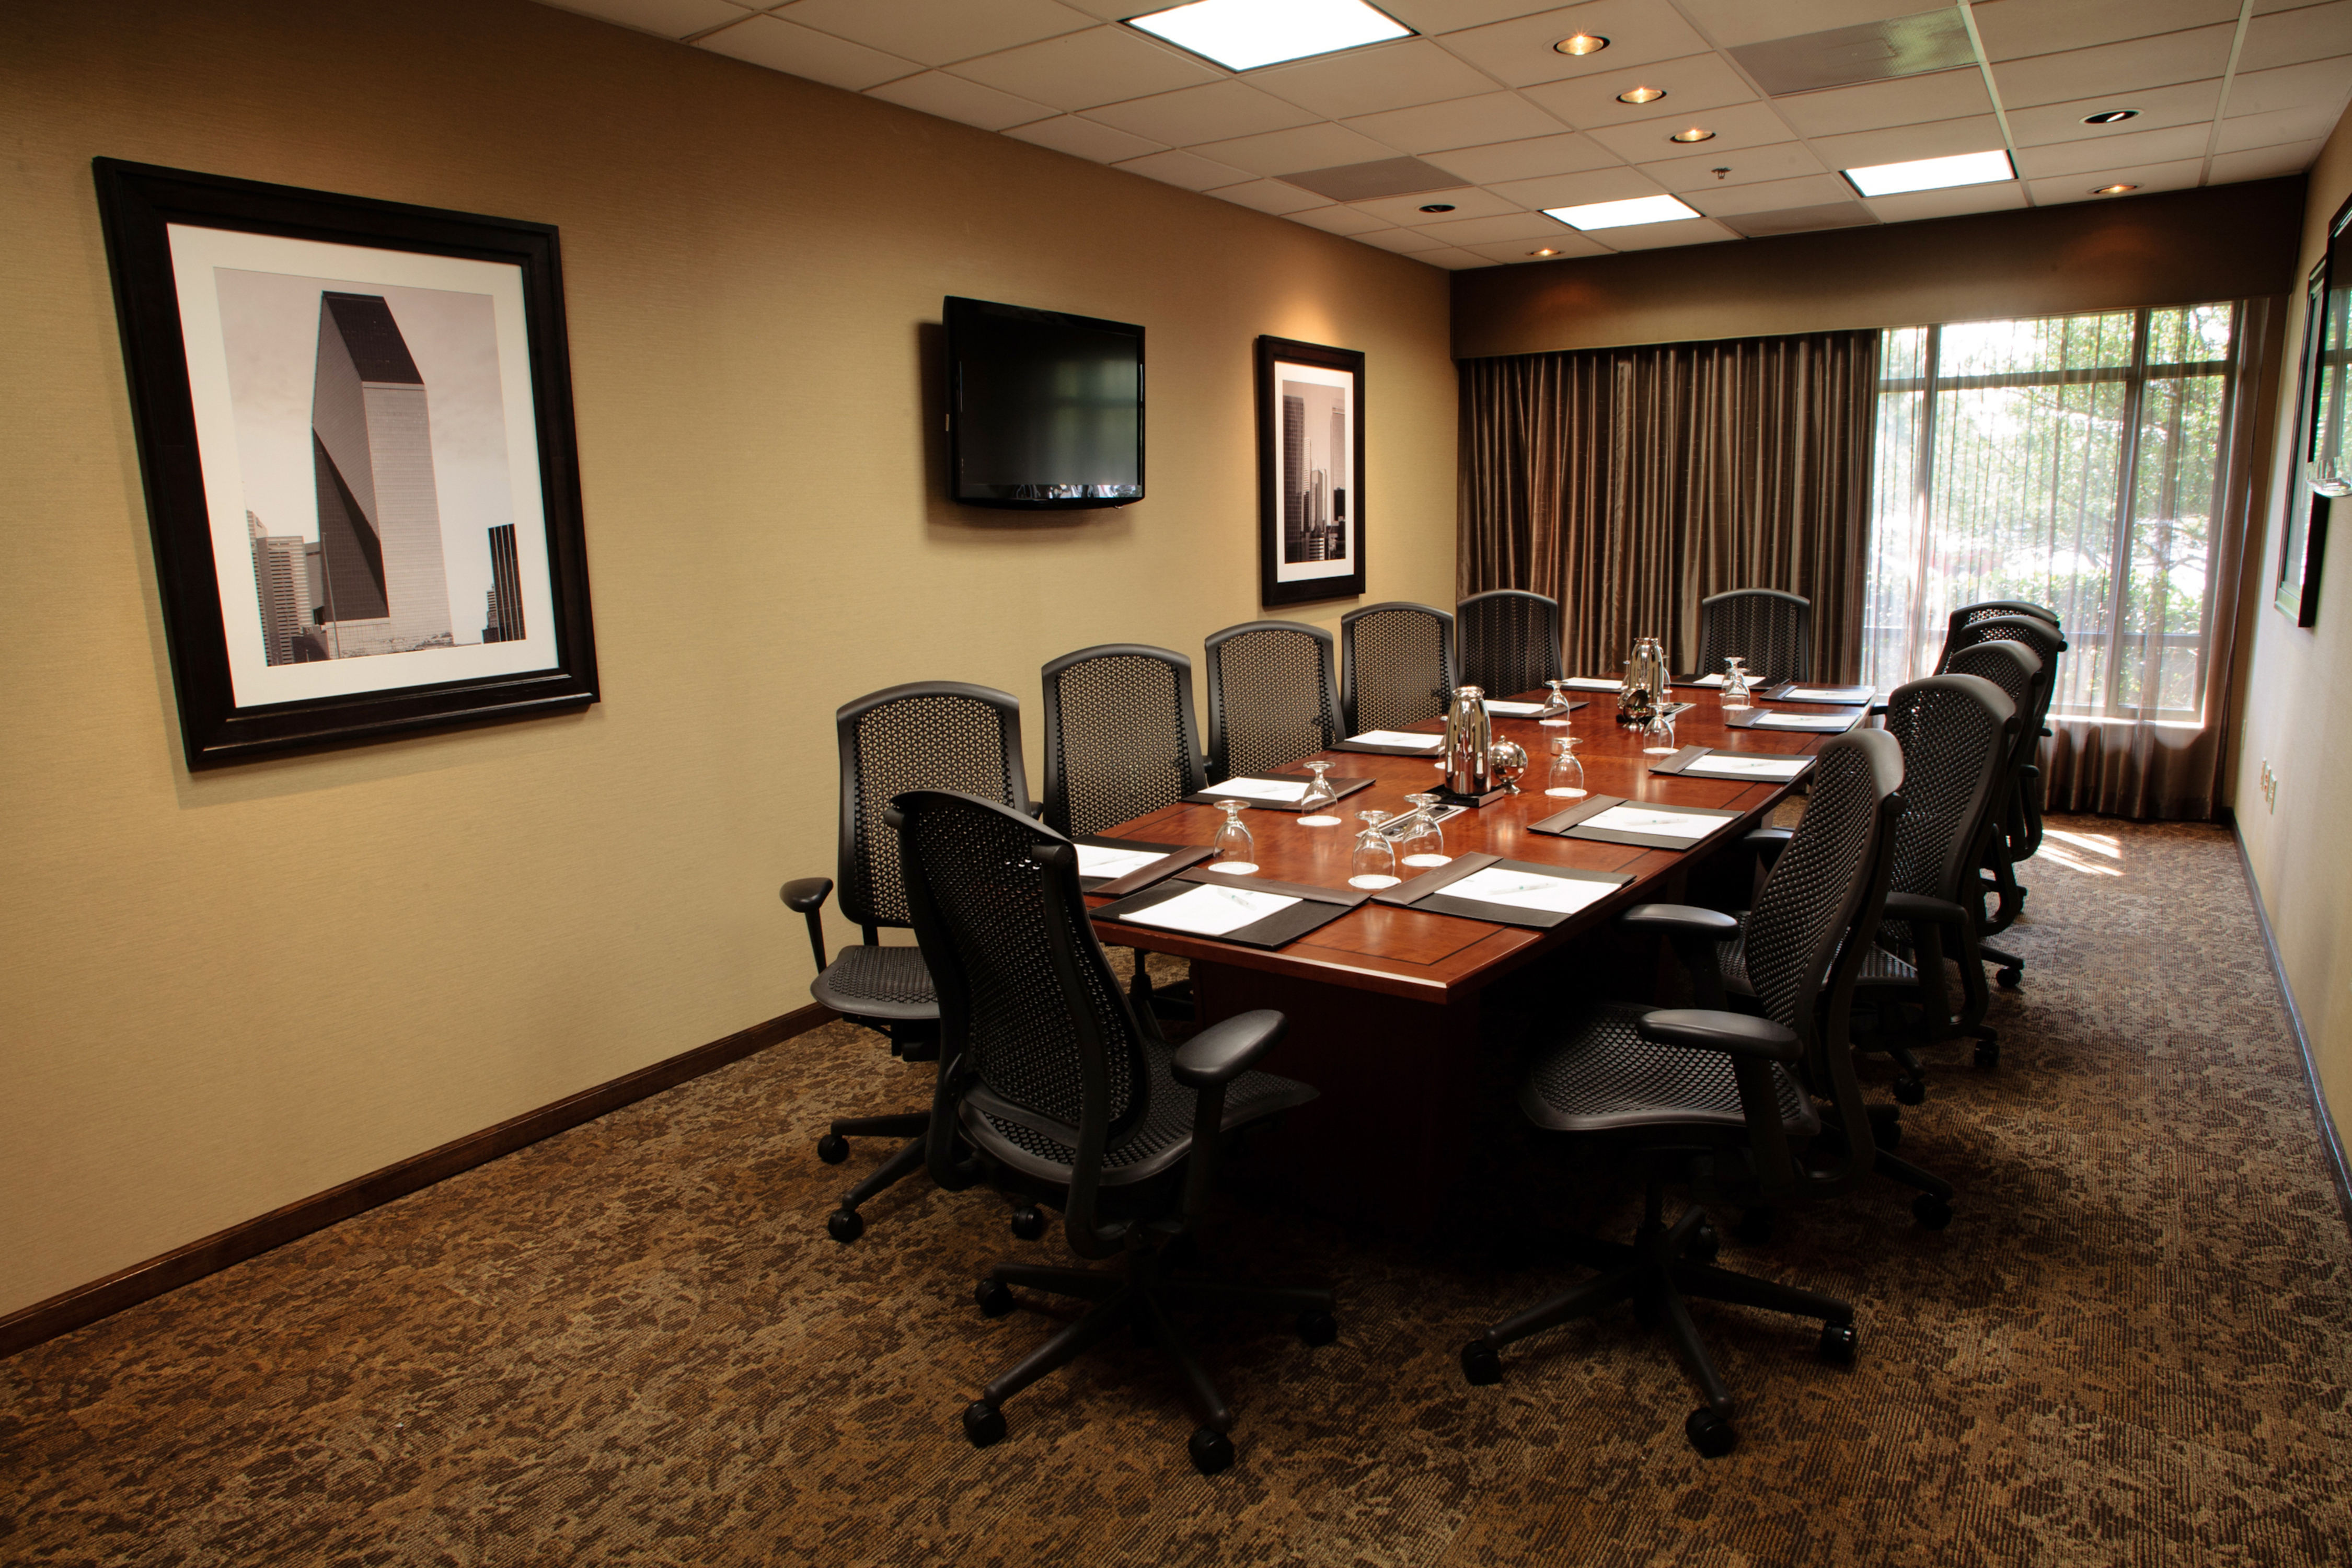 Nash Boardroom with Seating for Twelve Guests